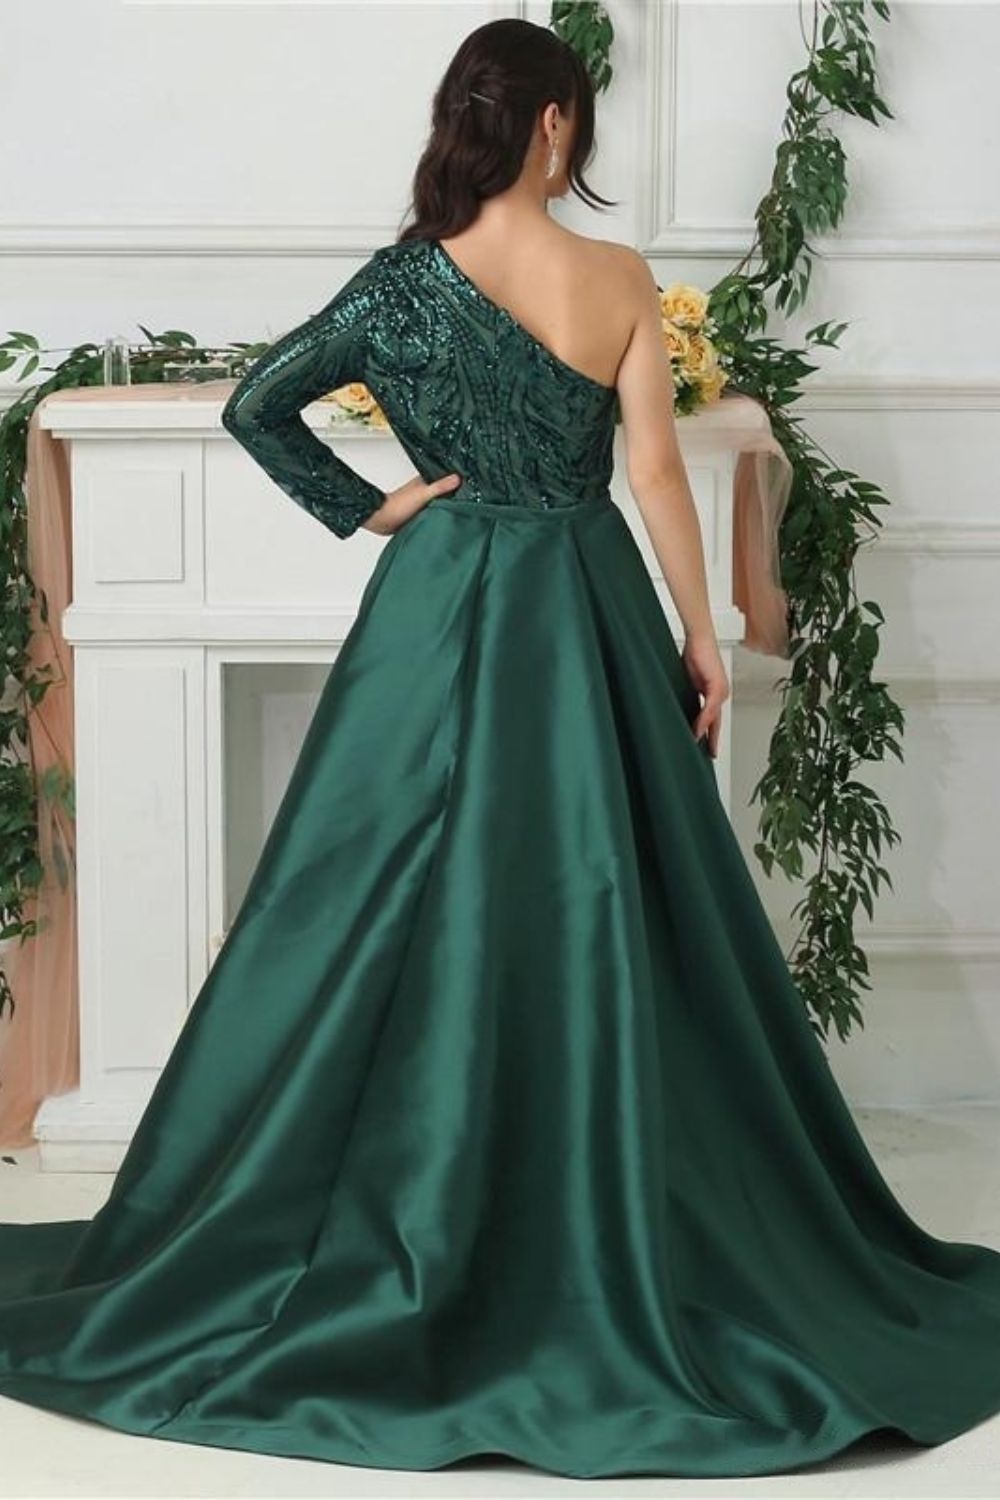 EverGreen One Shoulder Emerald Gown